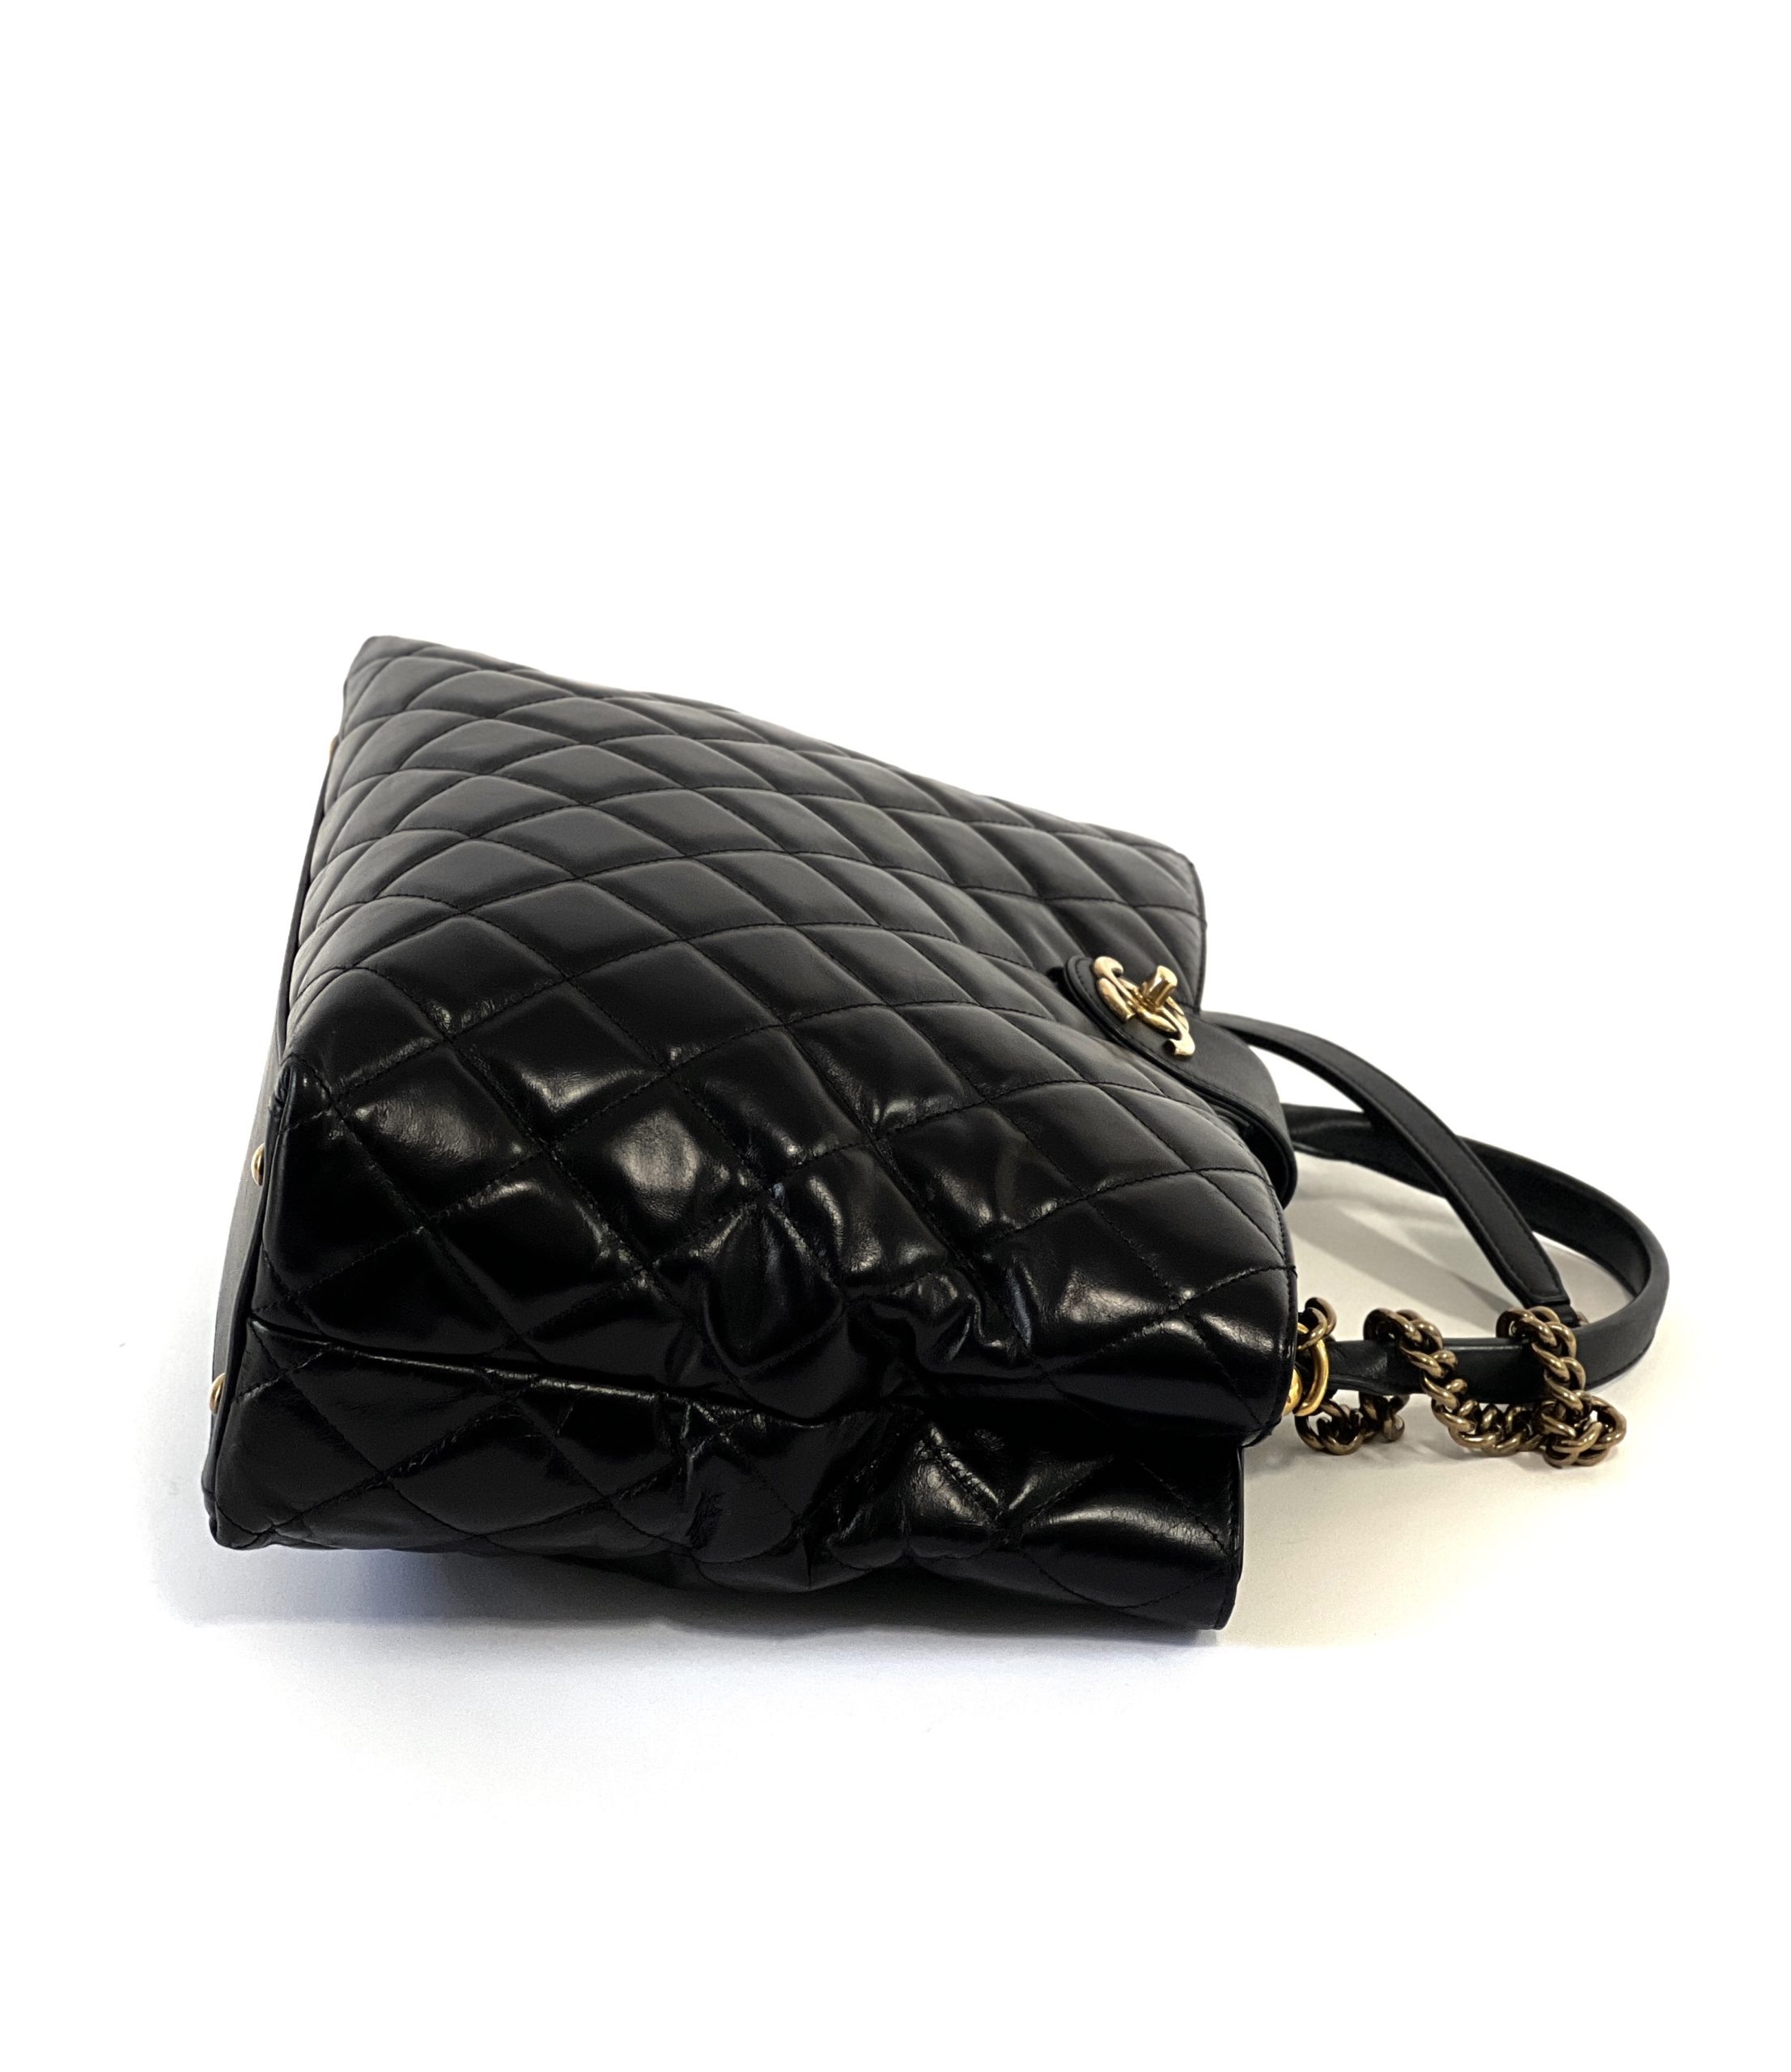 Chanel Black Caviar Leather Boston Bag with Gold Hardware. Very